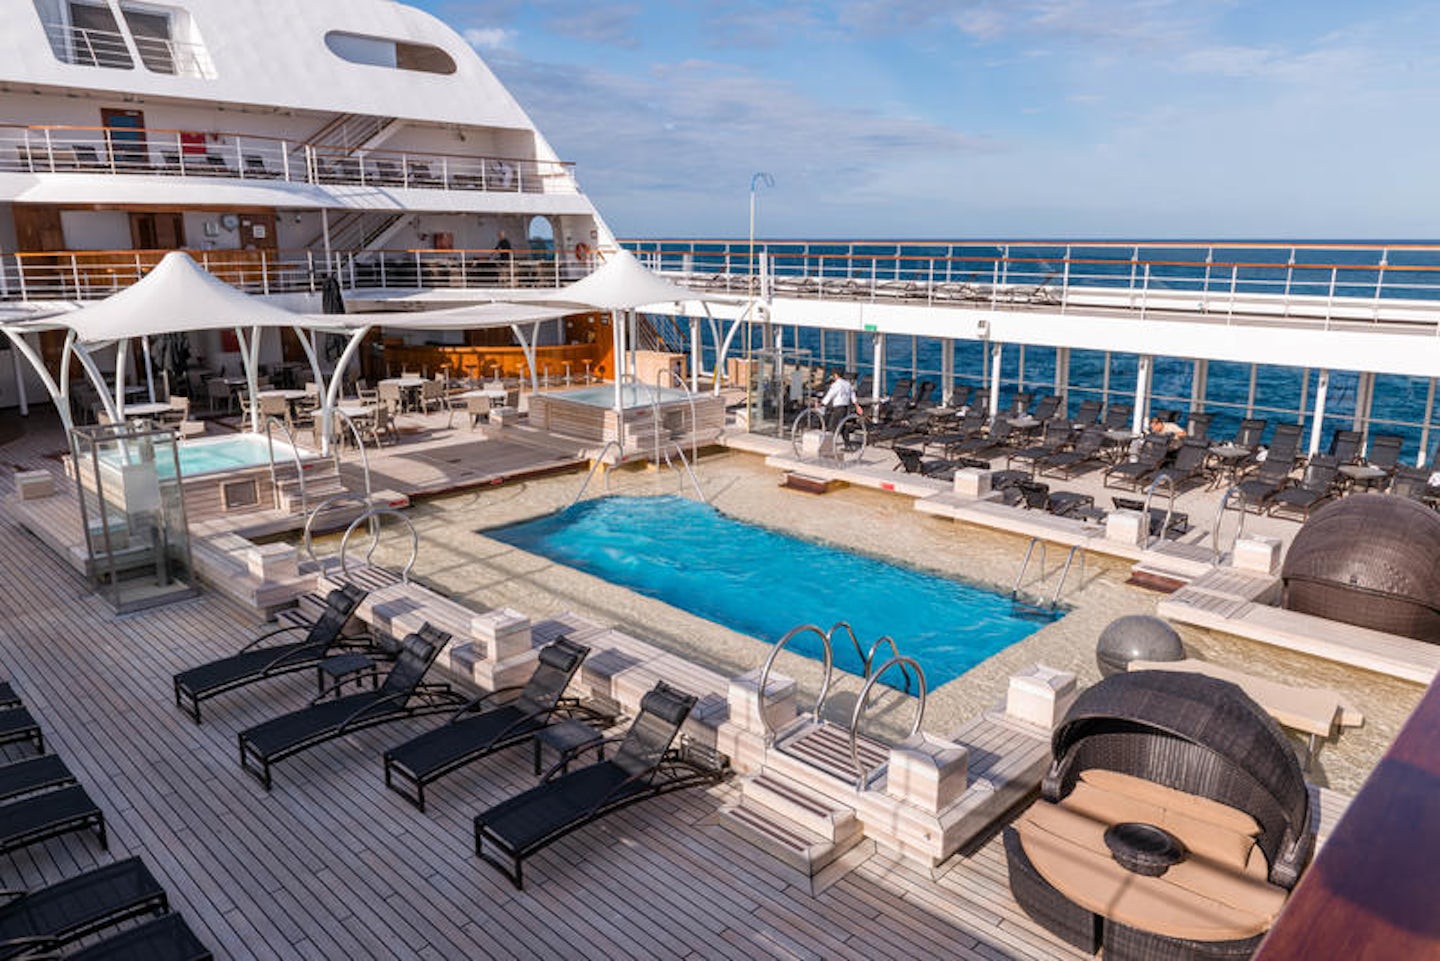 The Main Pool on Seabourn Quest